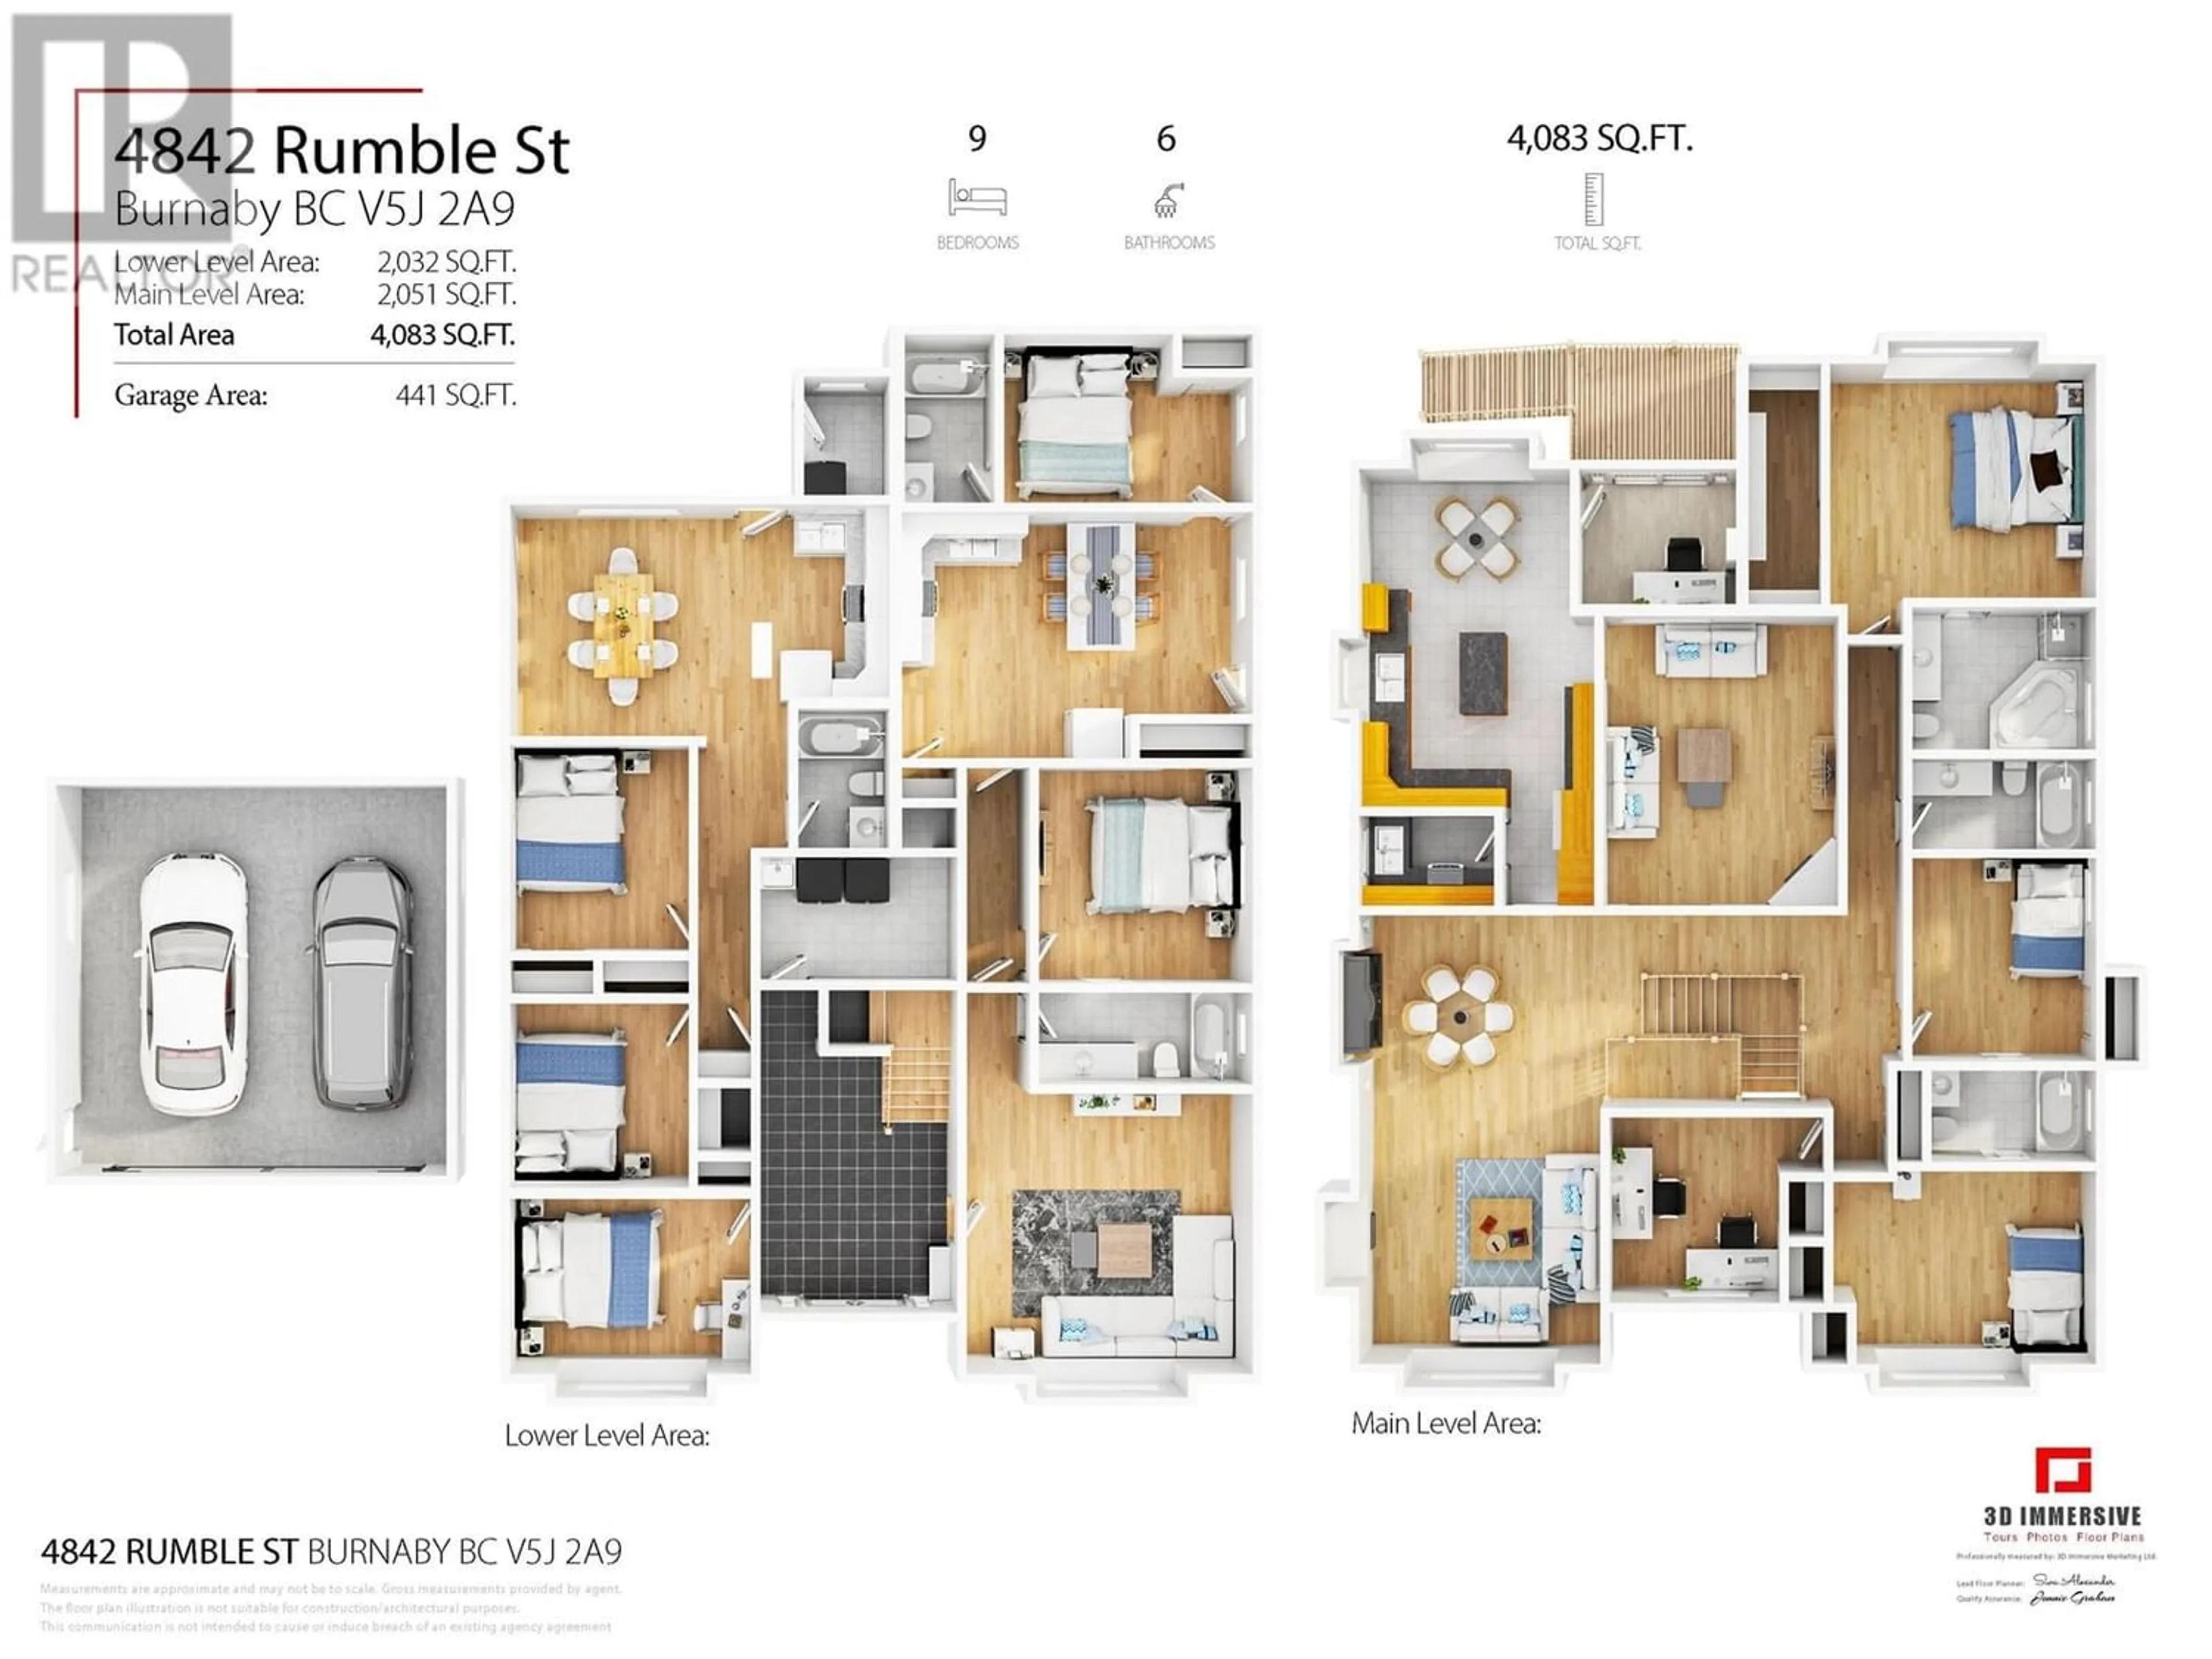 Floor plan for 4842 RUMBLE STREET, Burnaby British Columbia V5J2A9